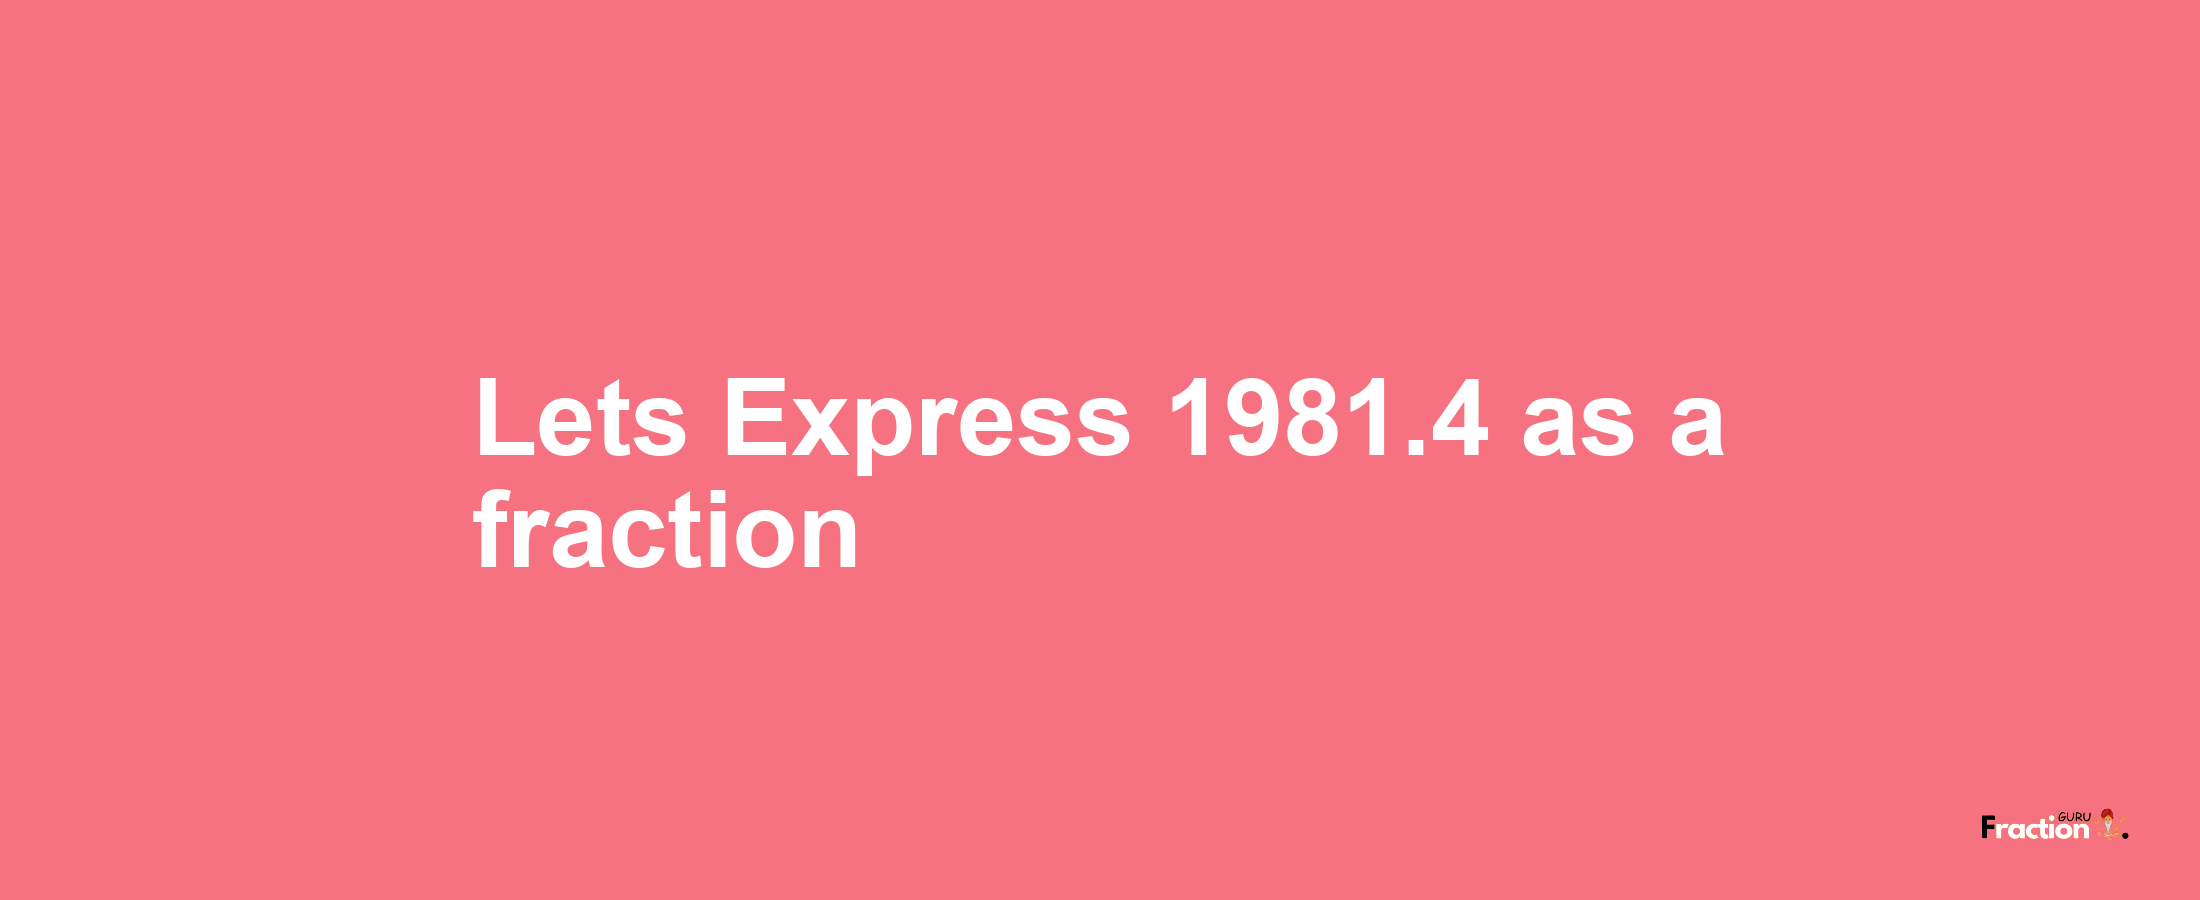 Lets Express 1981.4 as afraction